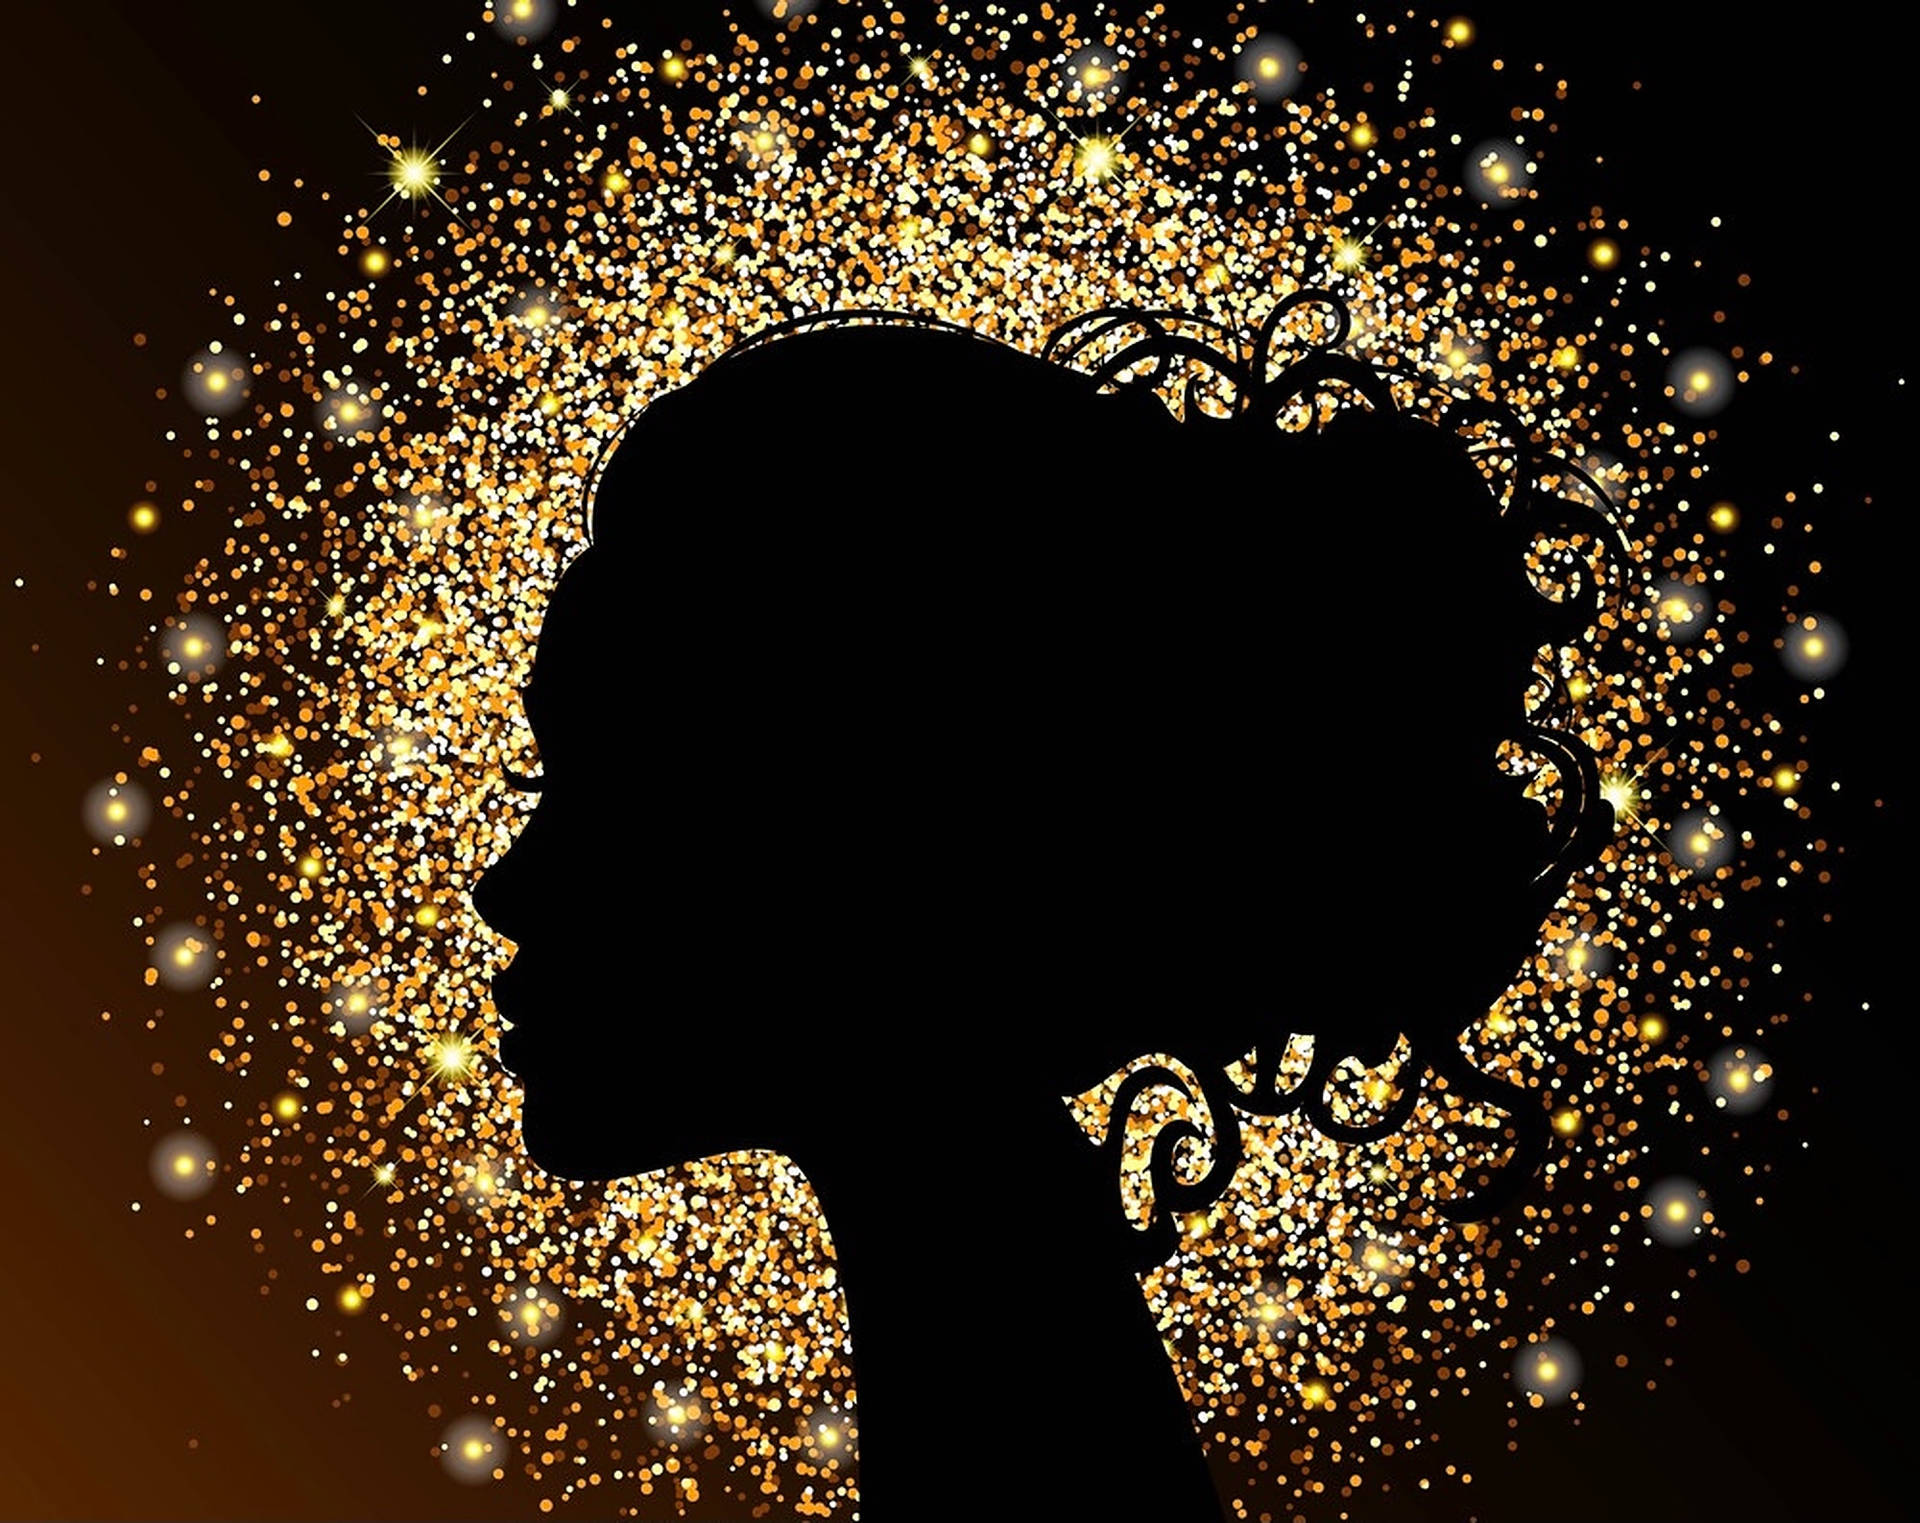 Female Silhouette In Gold Dust Background